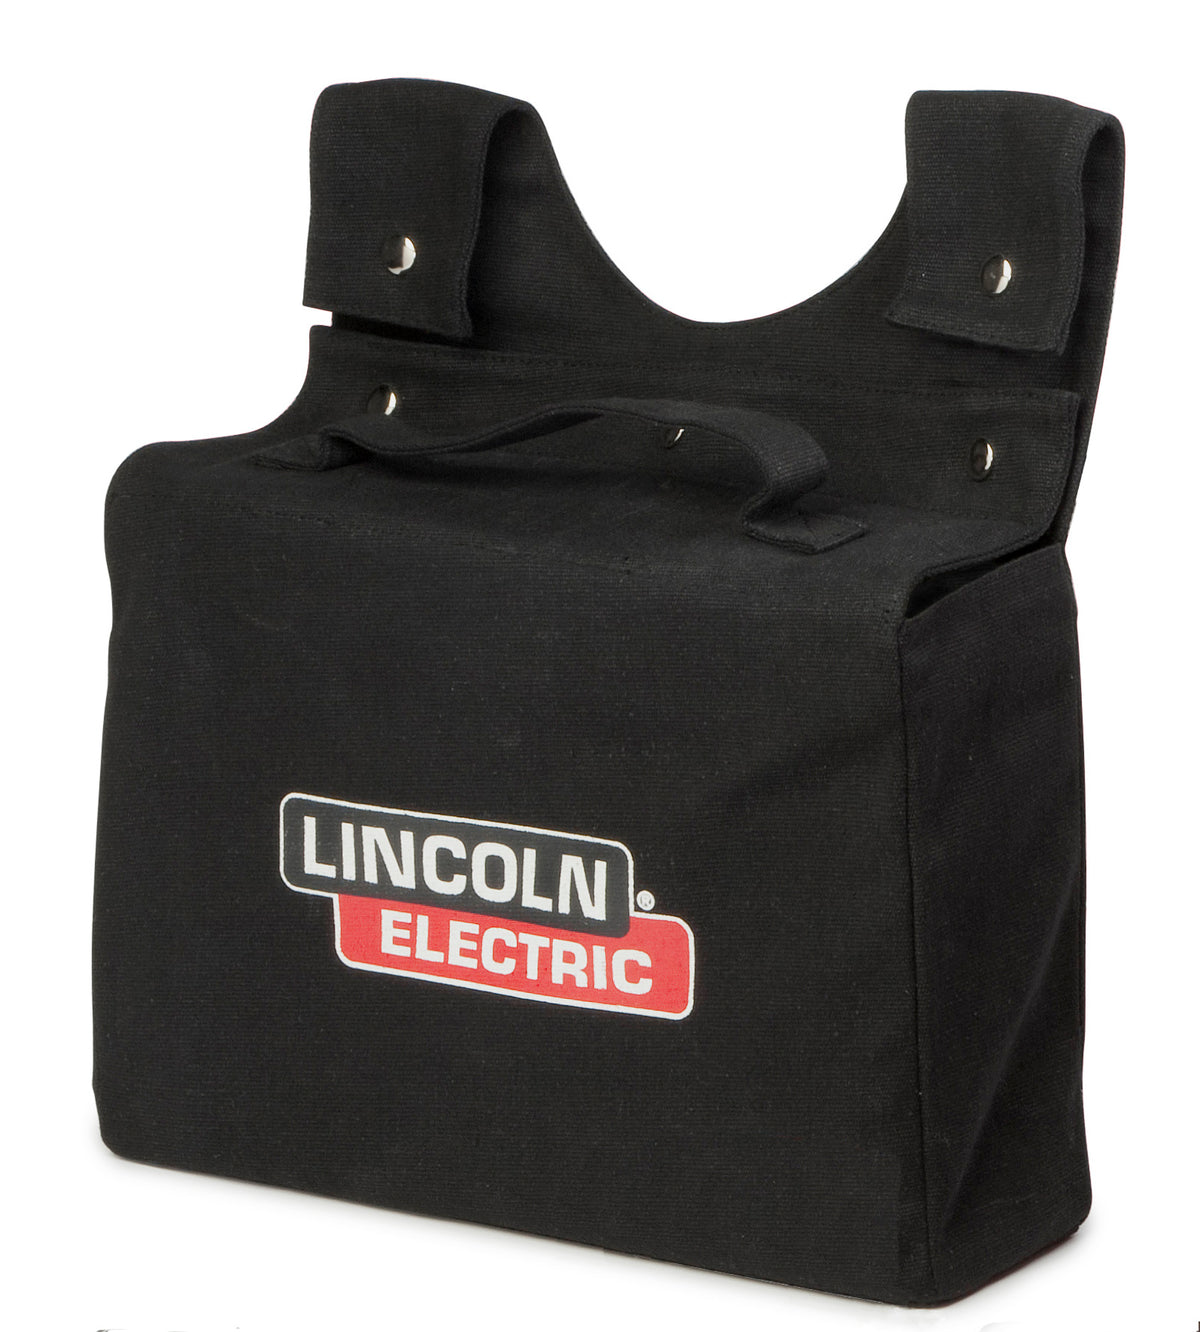 Lincoln Electric Welding Gear Canvas Bag